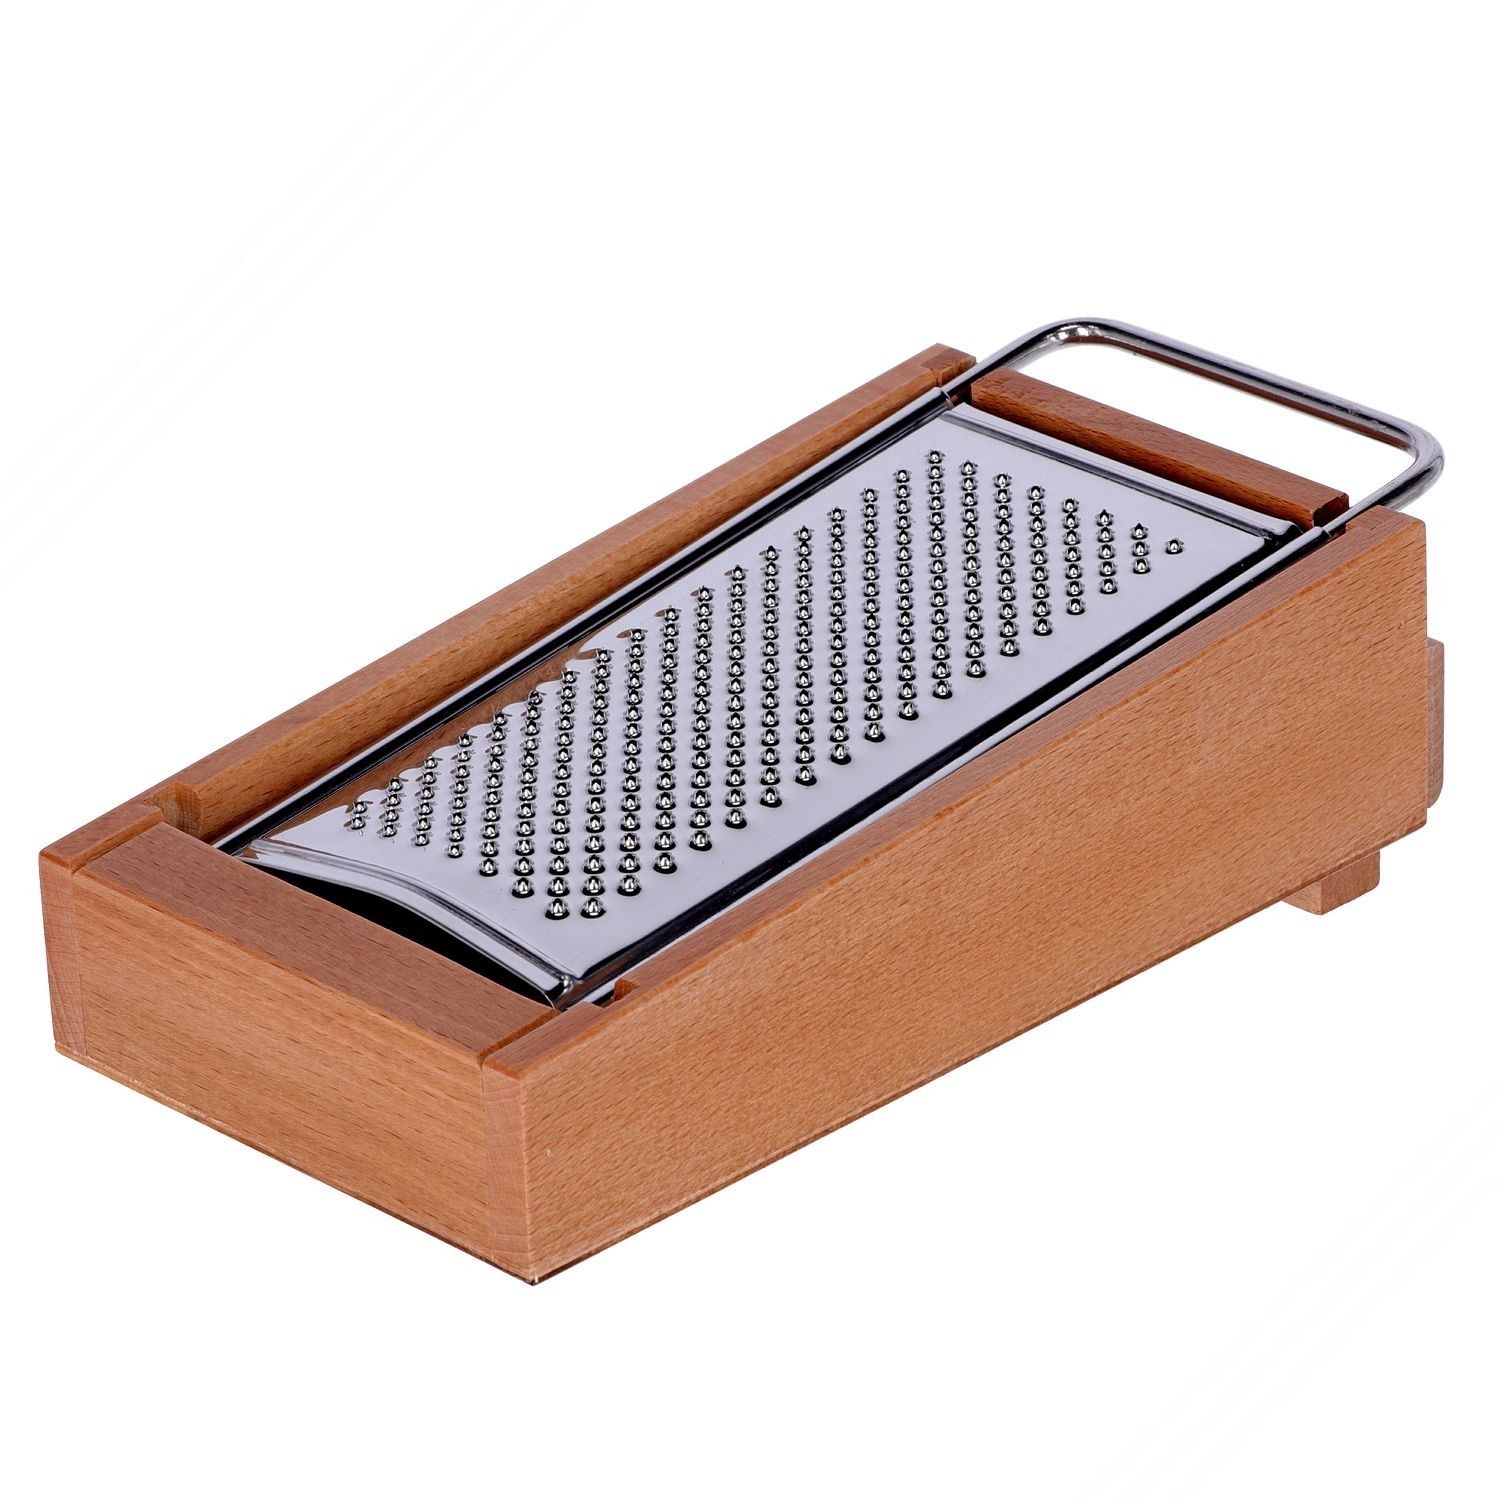 Wooden Cheese Grater Box With Drawer – Pasta Kitchen (tutto pasta)